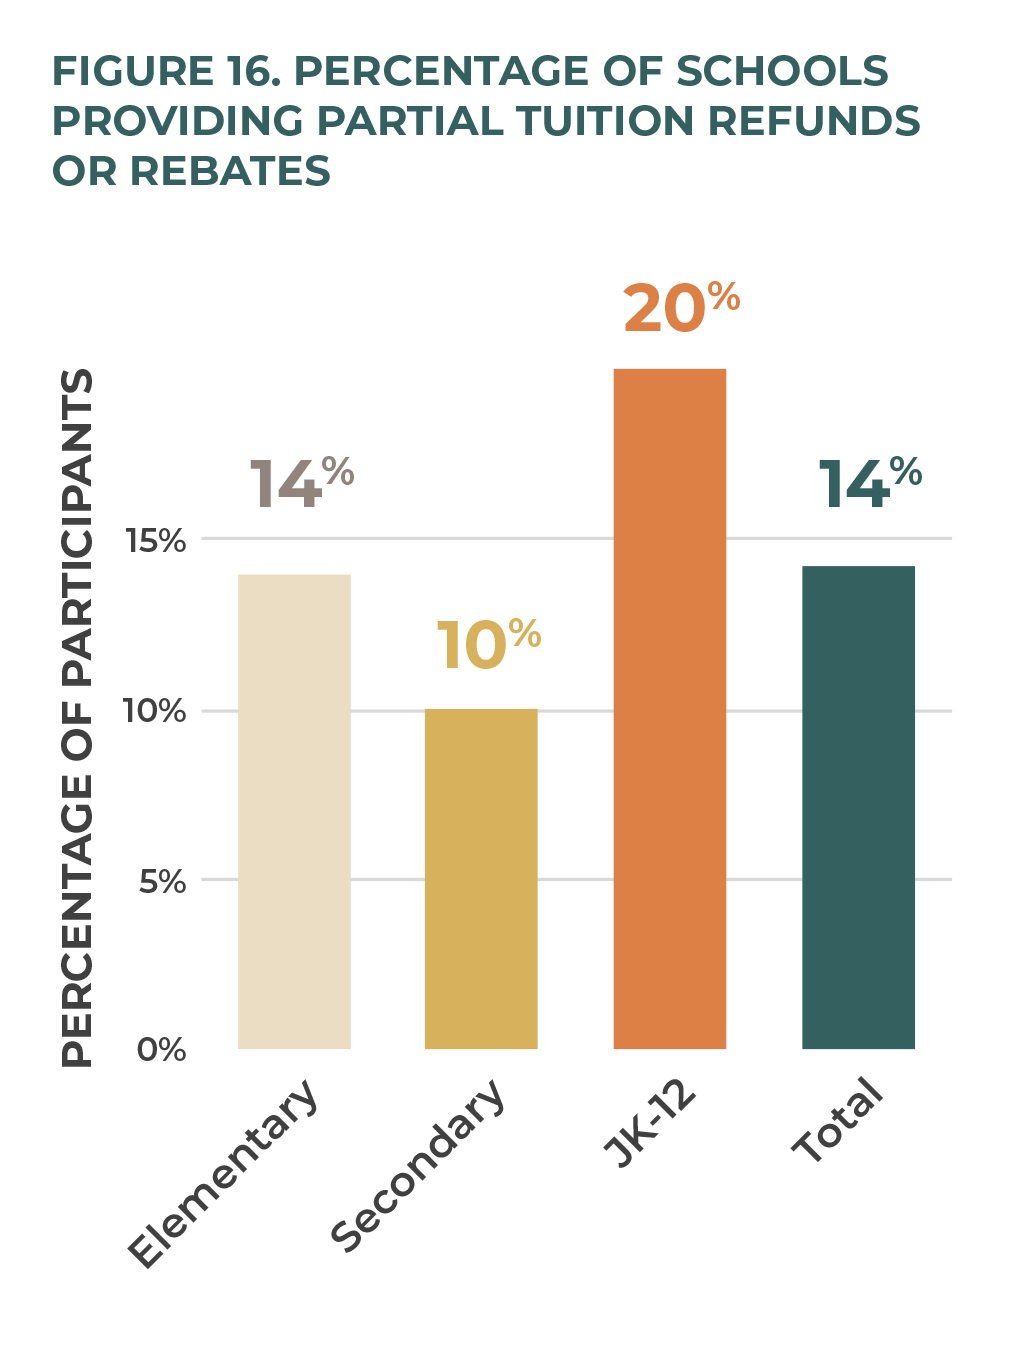 Figure 16. Percentage of Schools Providing Partial Tuition Refunds or Rebates.